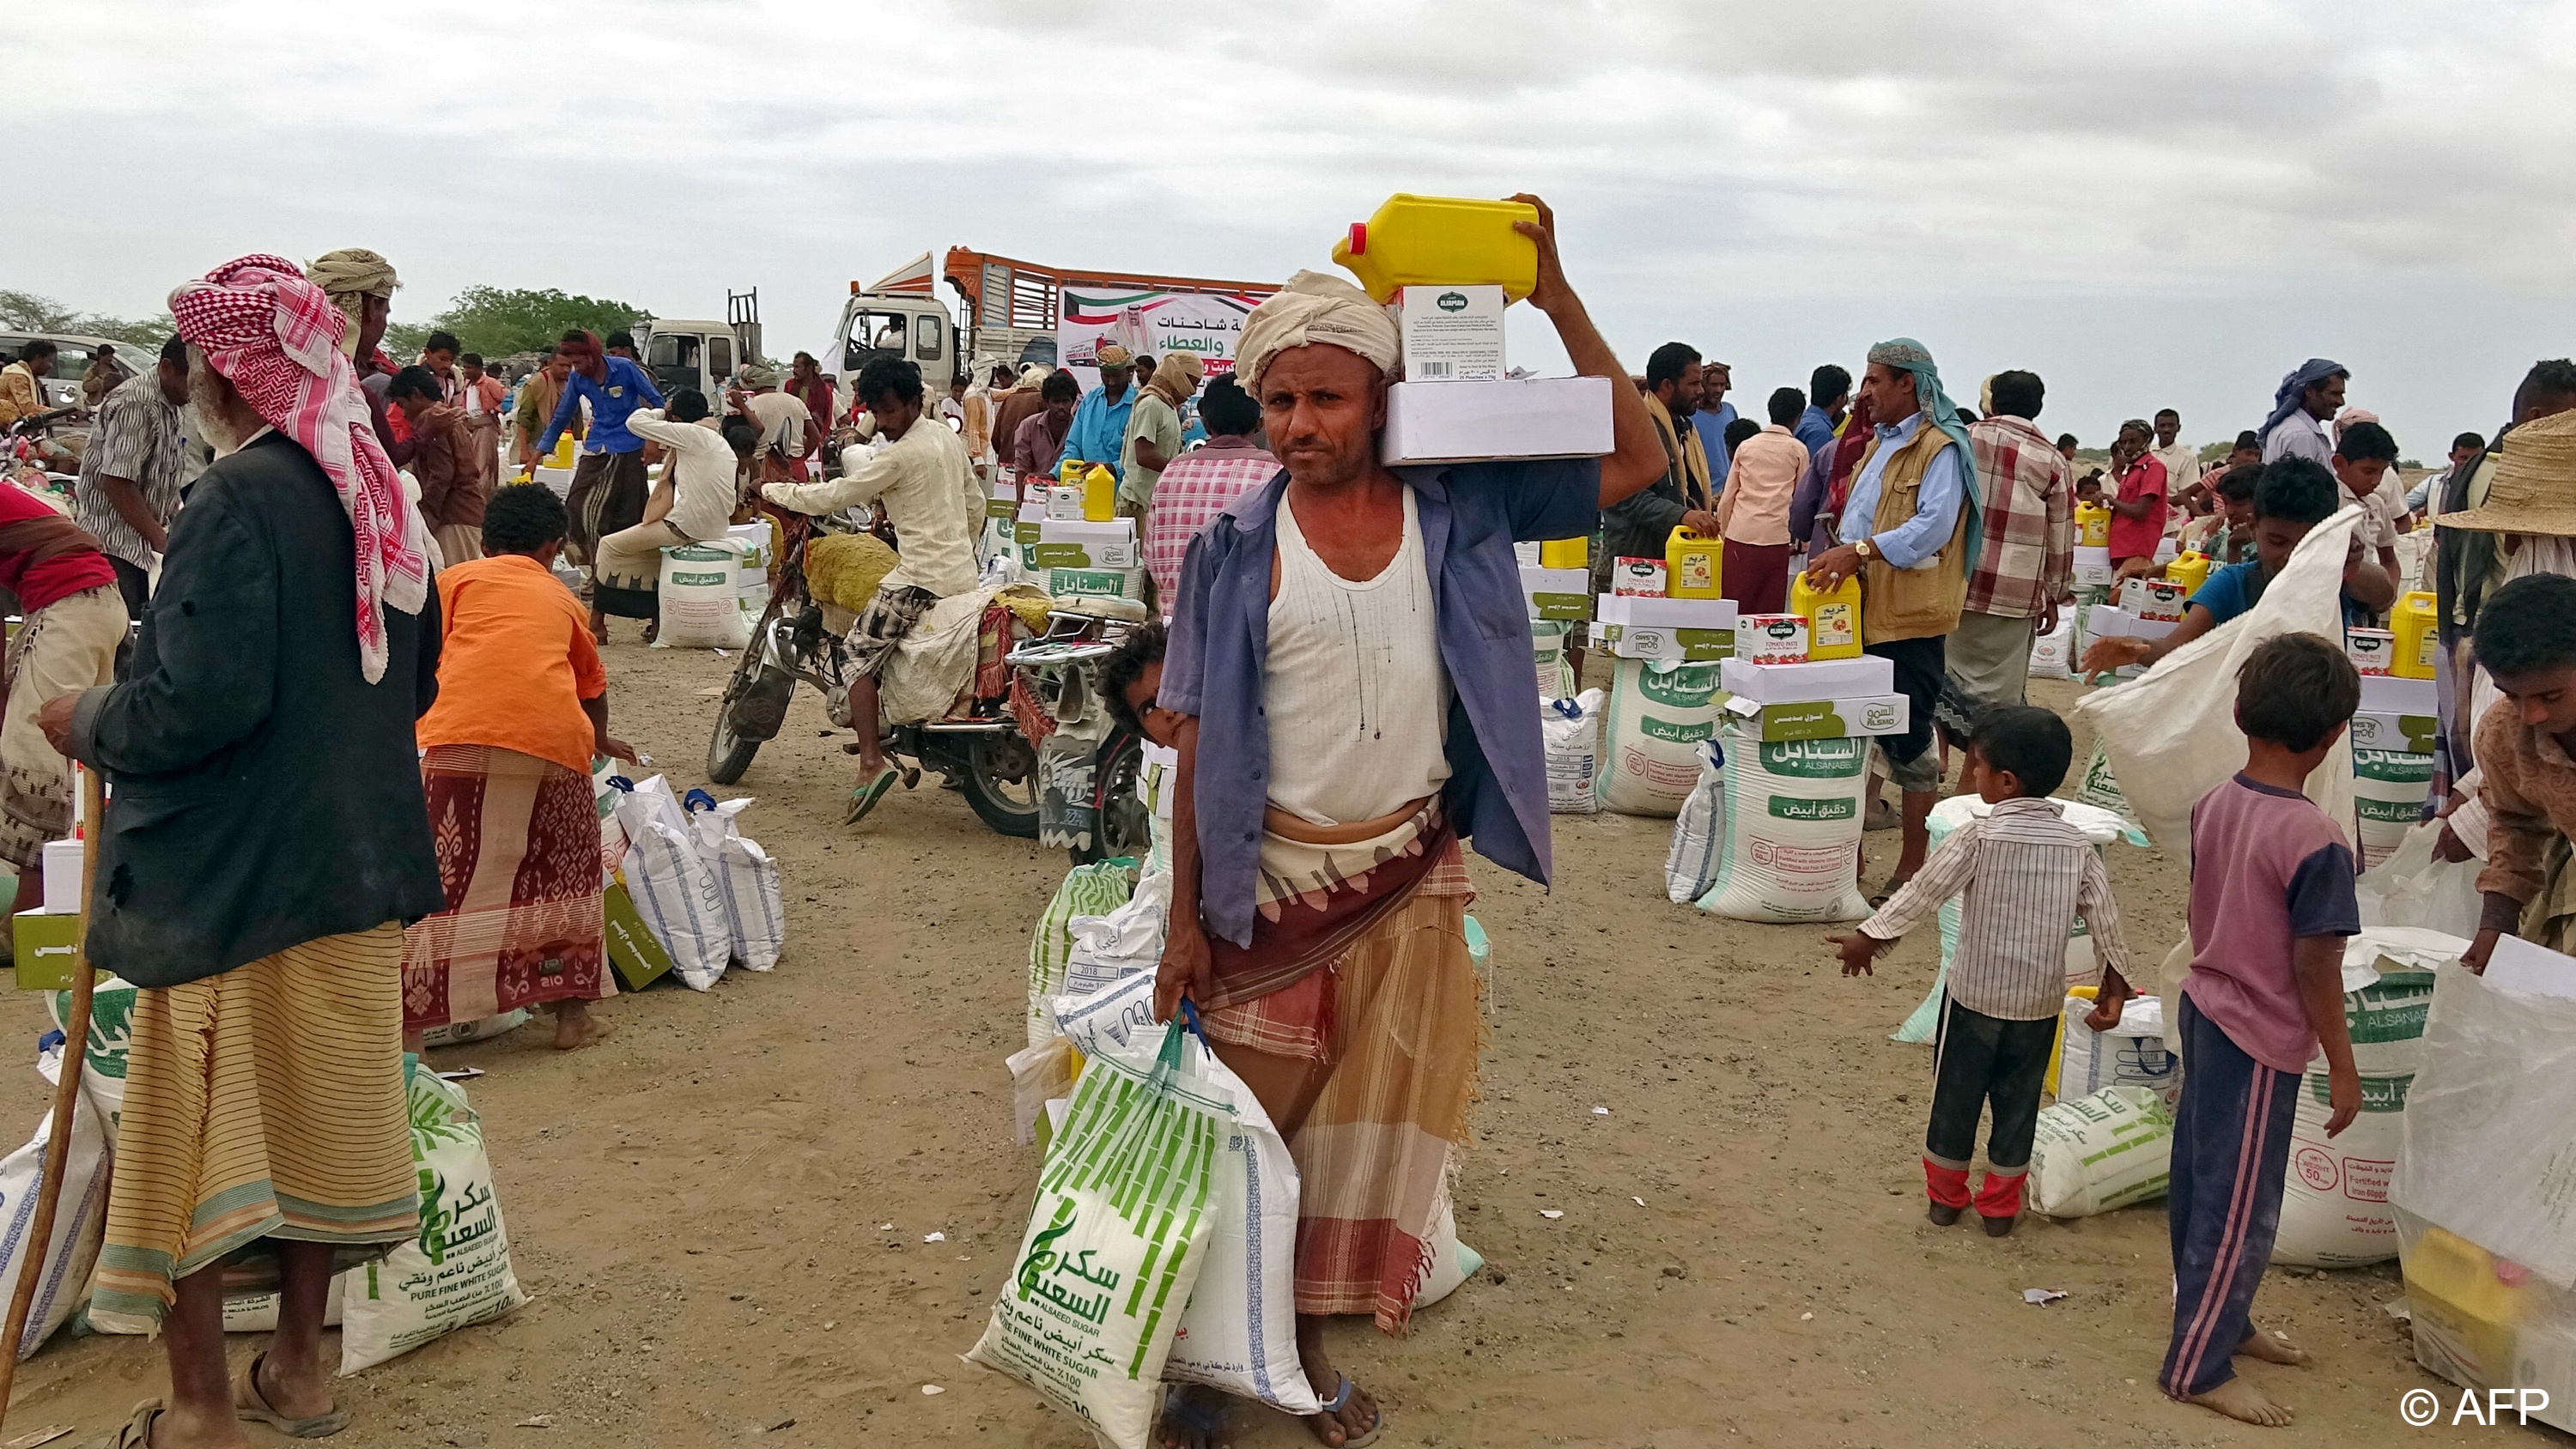 People displaced by conflict receive food aid donated by a Kuwaiti charity organisation in the village of Hays, near the conflict zone in Yemen's western province of Hodeida, 22 February 2021